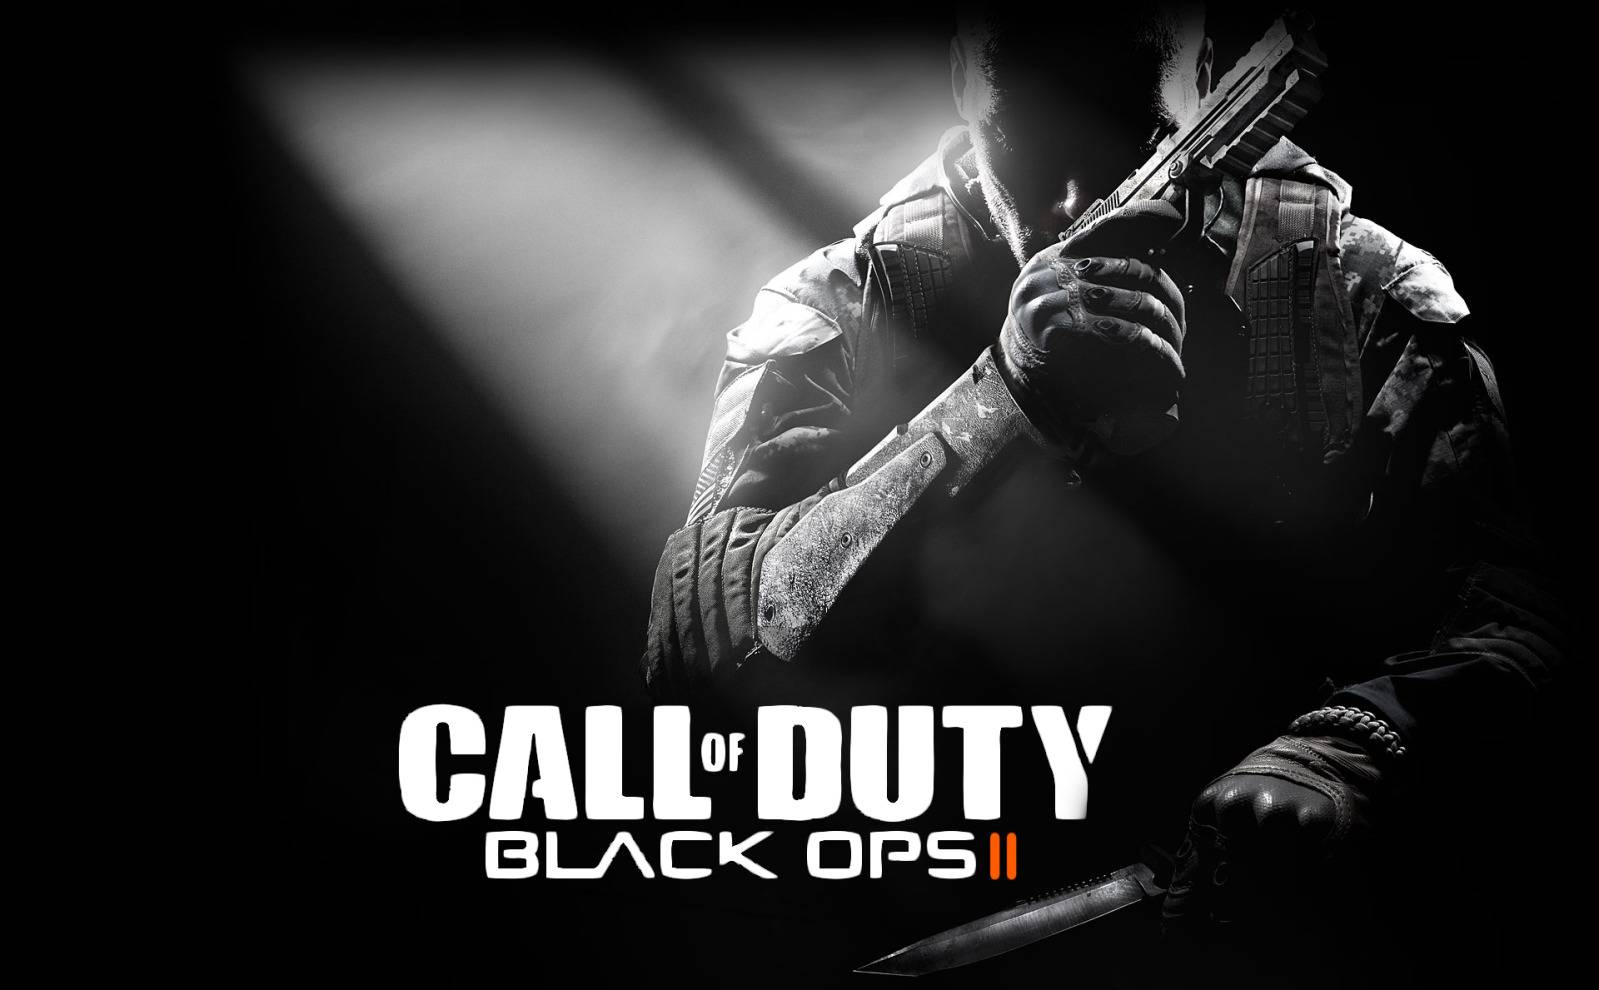 Black Ops Wallpaper For Ipod. Free Download Wallpaper